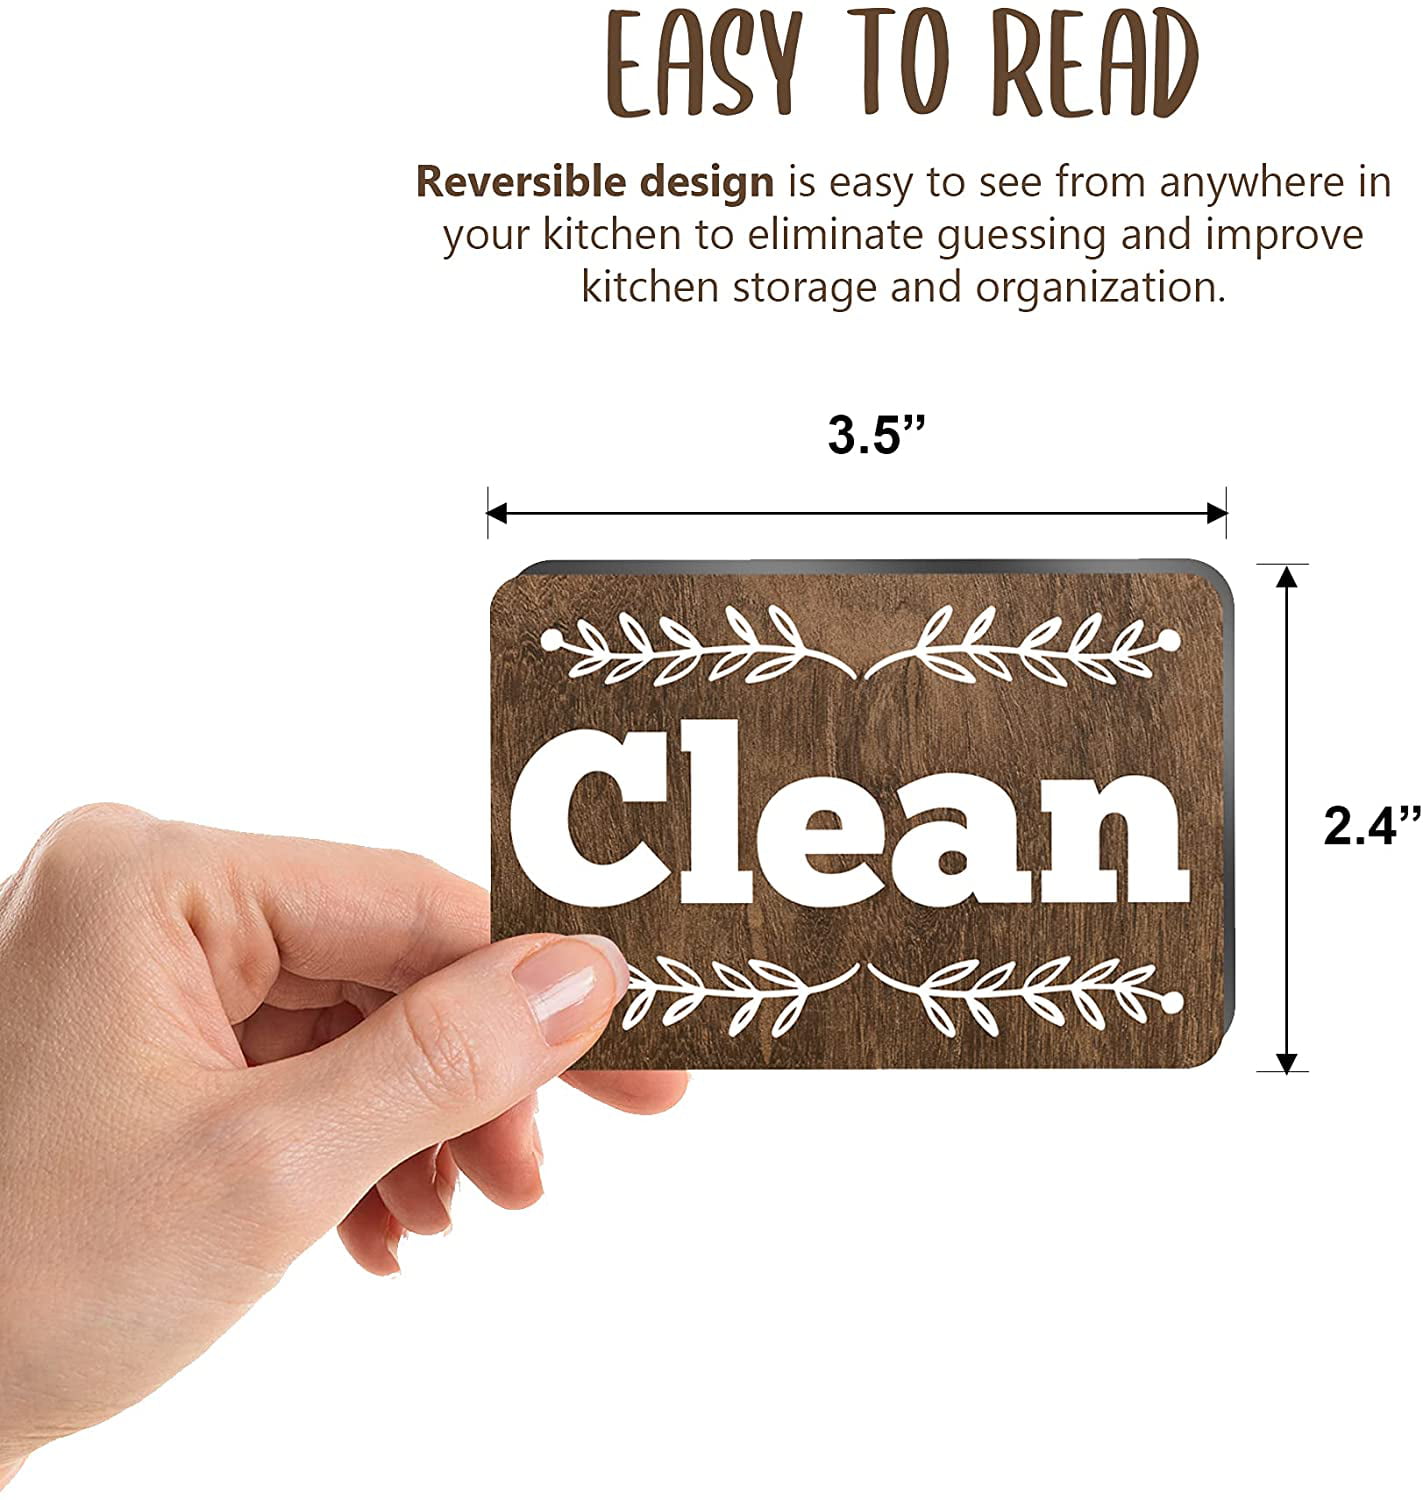 Double Sided Clean or Dirty Dishwasher Magnet Indicator Sign (3.5